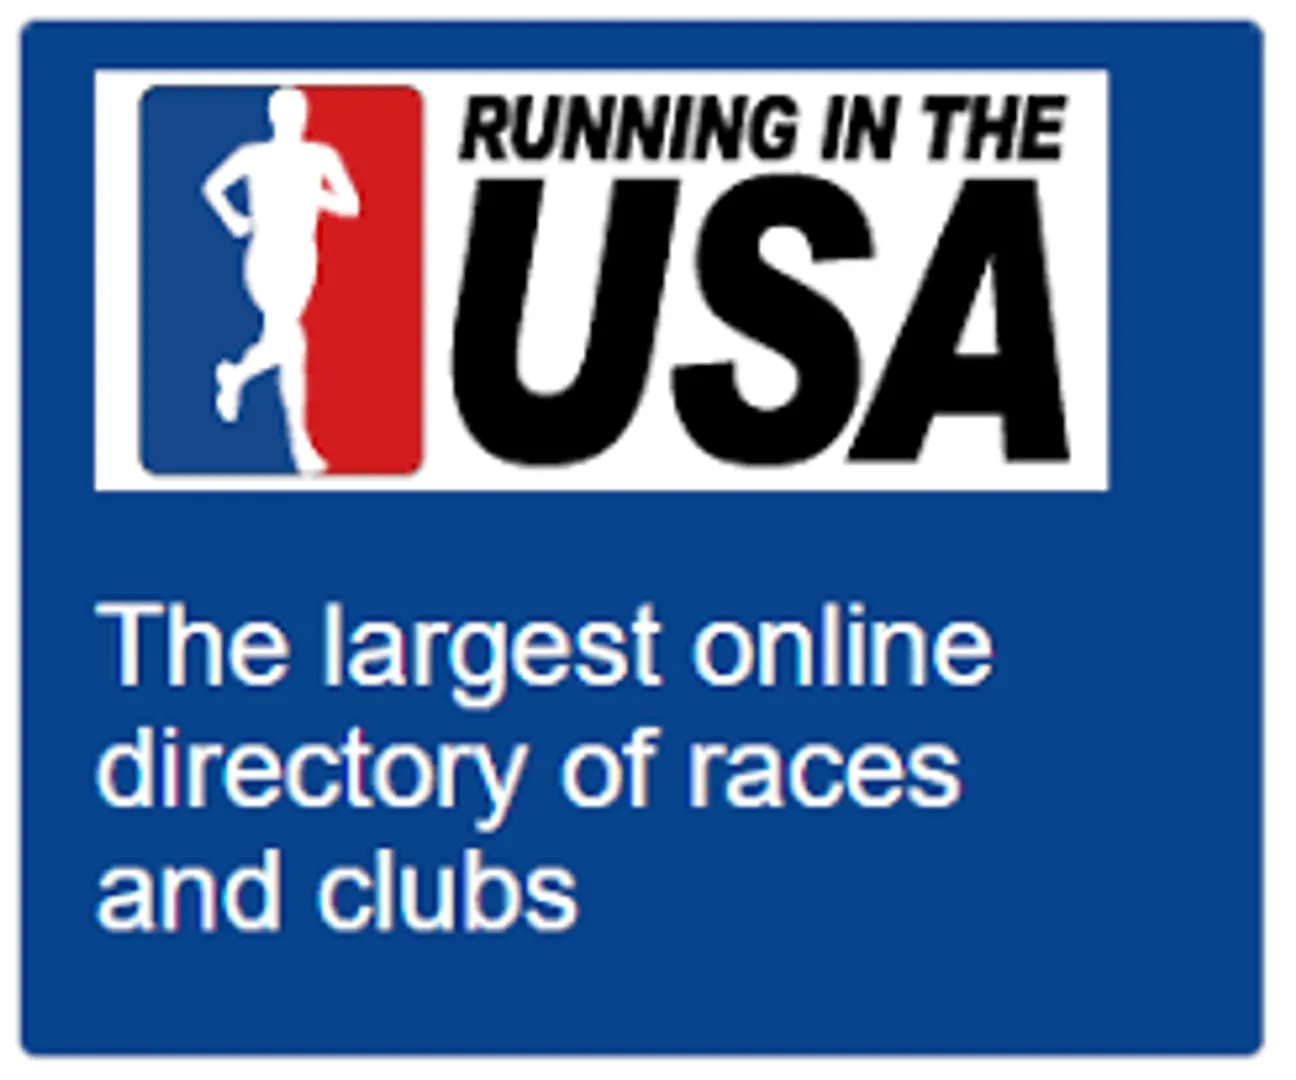 If you are looking for a running race in the US, the best calendar of upcoming running events is Running in the USA

https://runningintheusa.com/

You'll find races of all types (road races, trail races, etc.), distances, sizes (small, local races to big city marathons) across the country. 